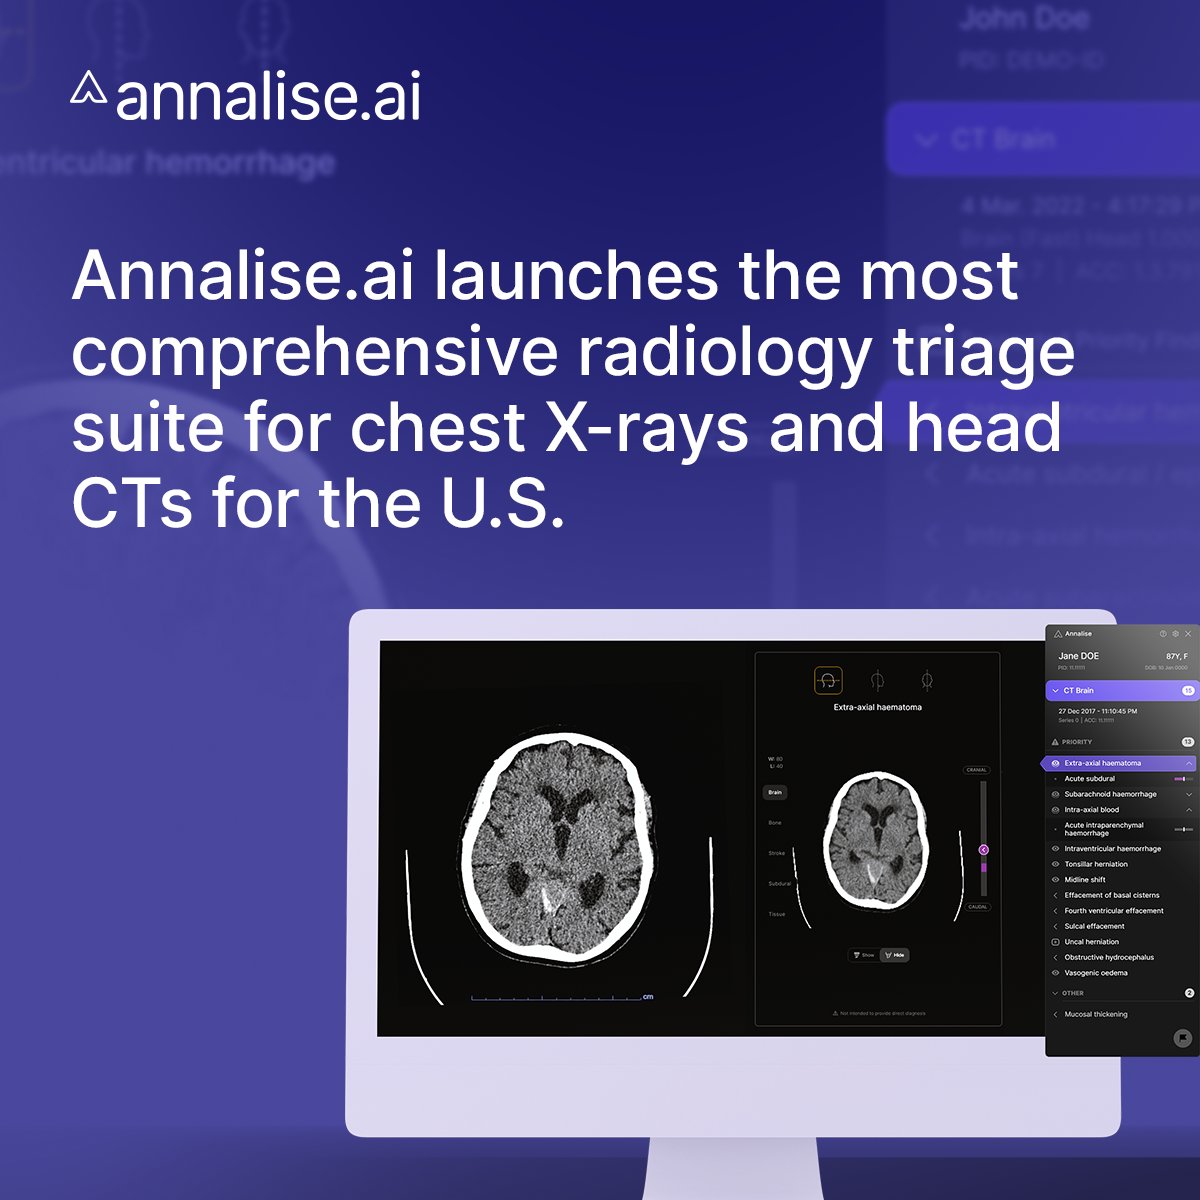 Ever wondered what makes an #AI solution truly comprehensive? #ComprehensiveAI means 1️⃣ Breadth of Coverage 2️⃣ Depth of Coverage 3️⃣ Reach of the Product Head over to Annalise.ai booth to learn about our latest product additions to make it even more comprehensive.